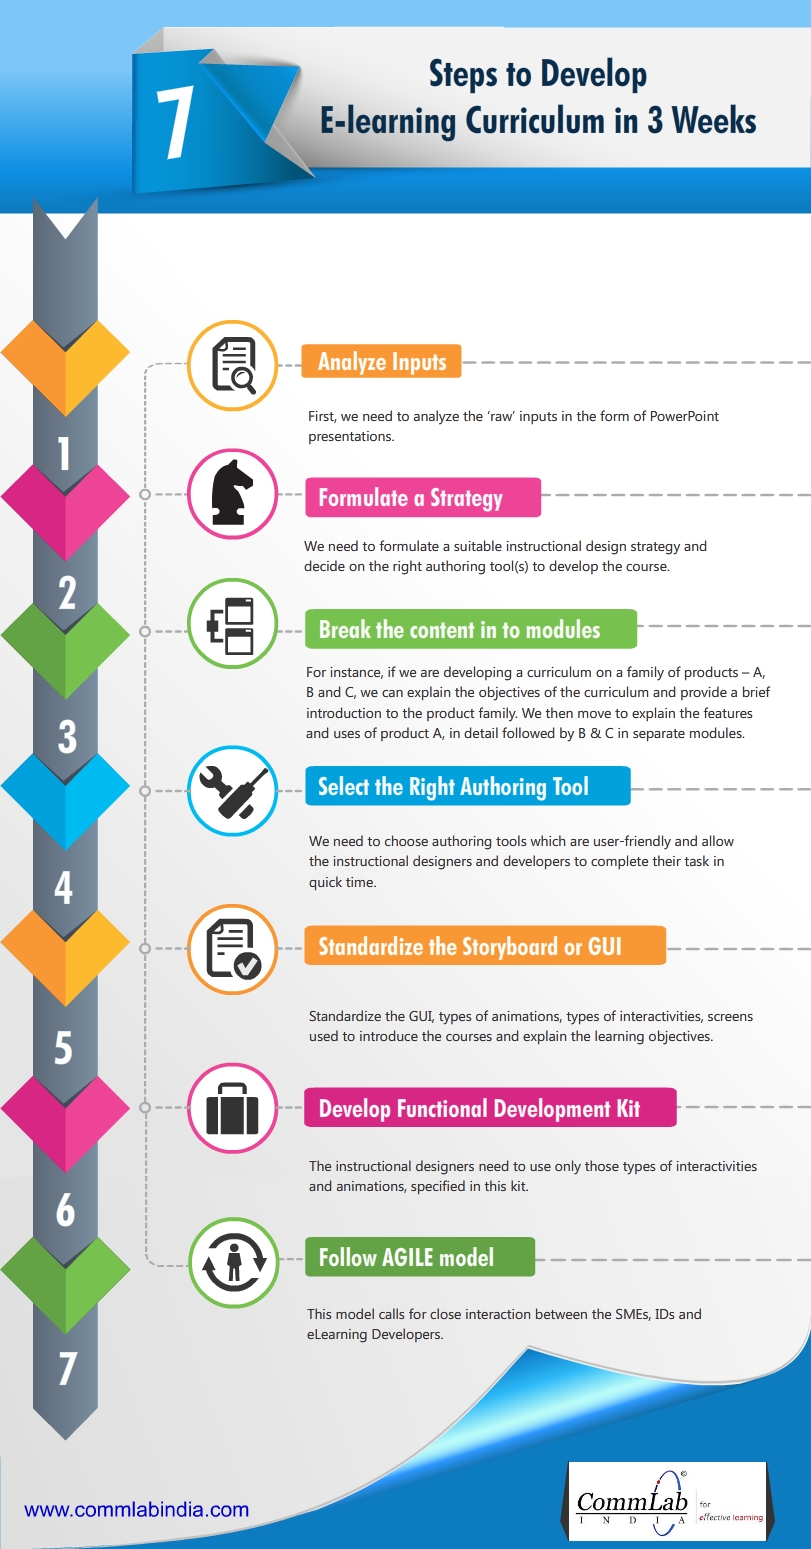 7 Steps to Develop An E-learning Curriculum in 3 Weeks - An Infographic